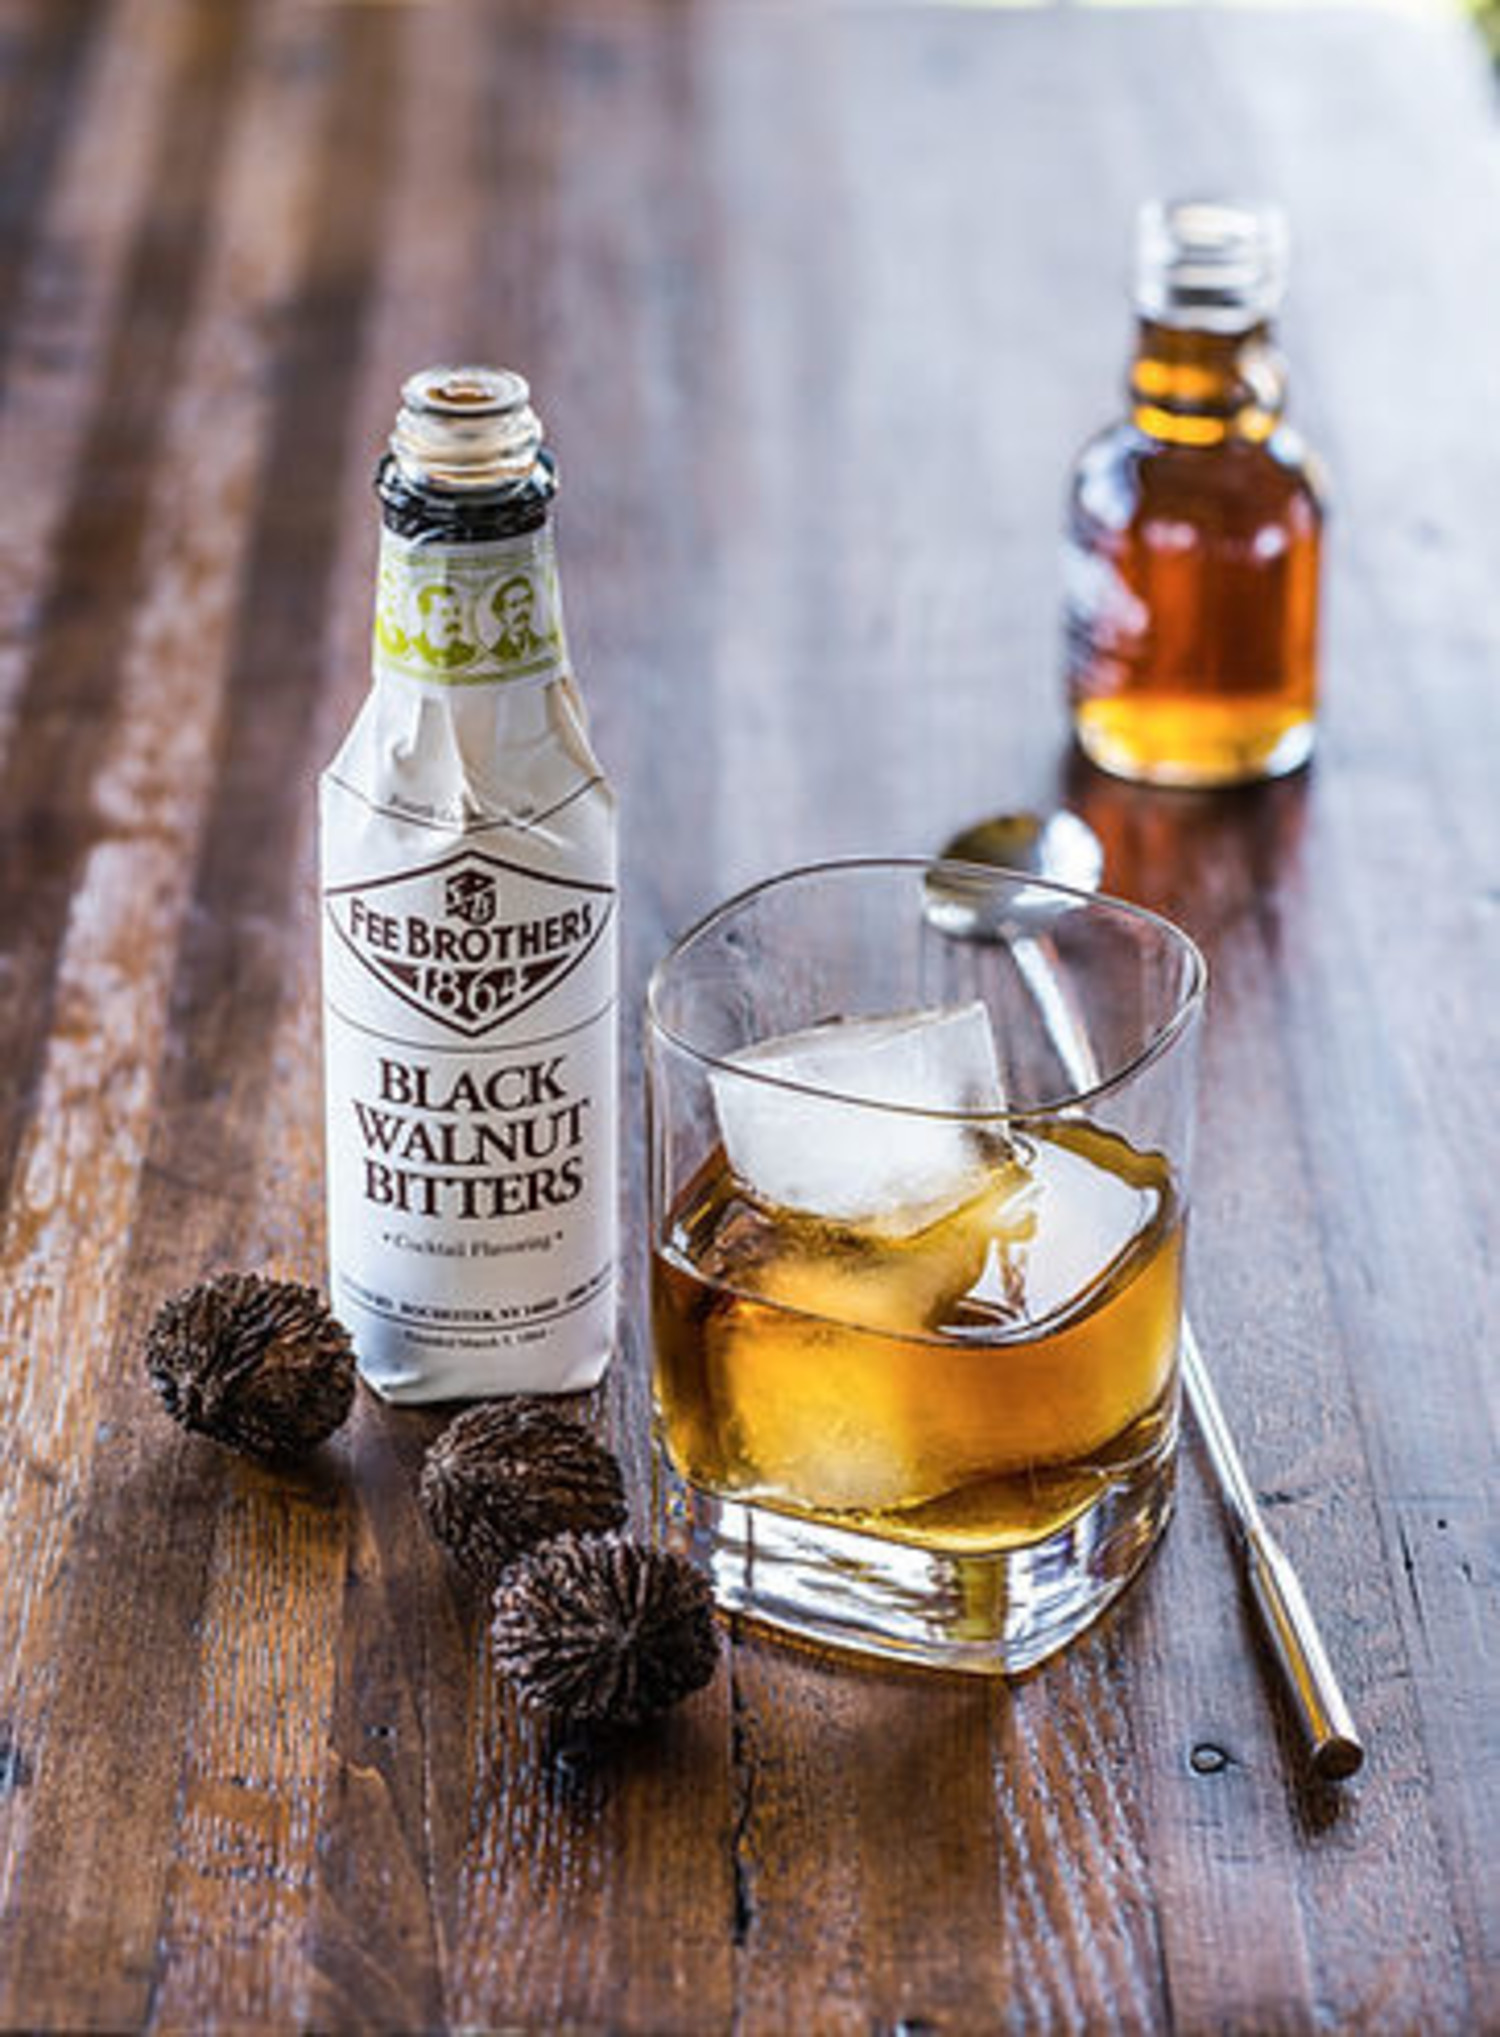 Fee Brothers Black Walnut Bitters - Whisk